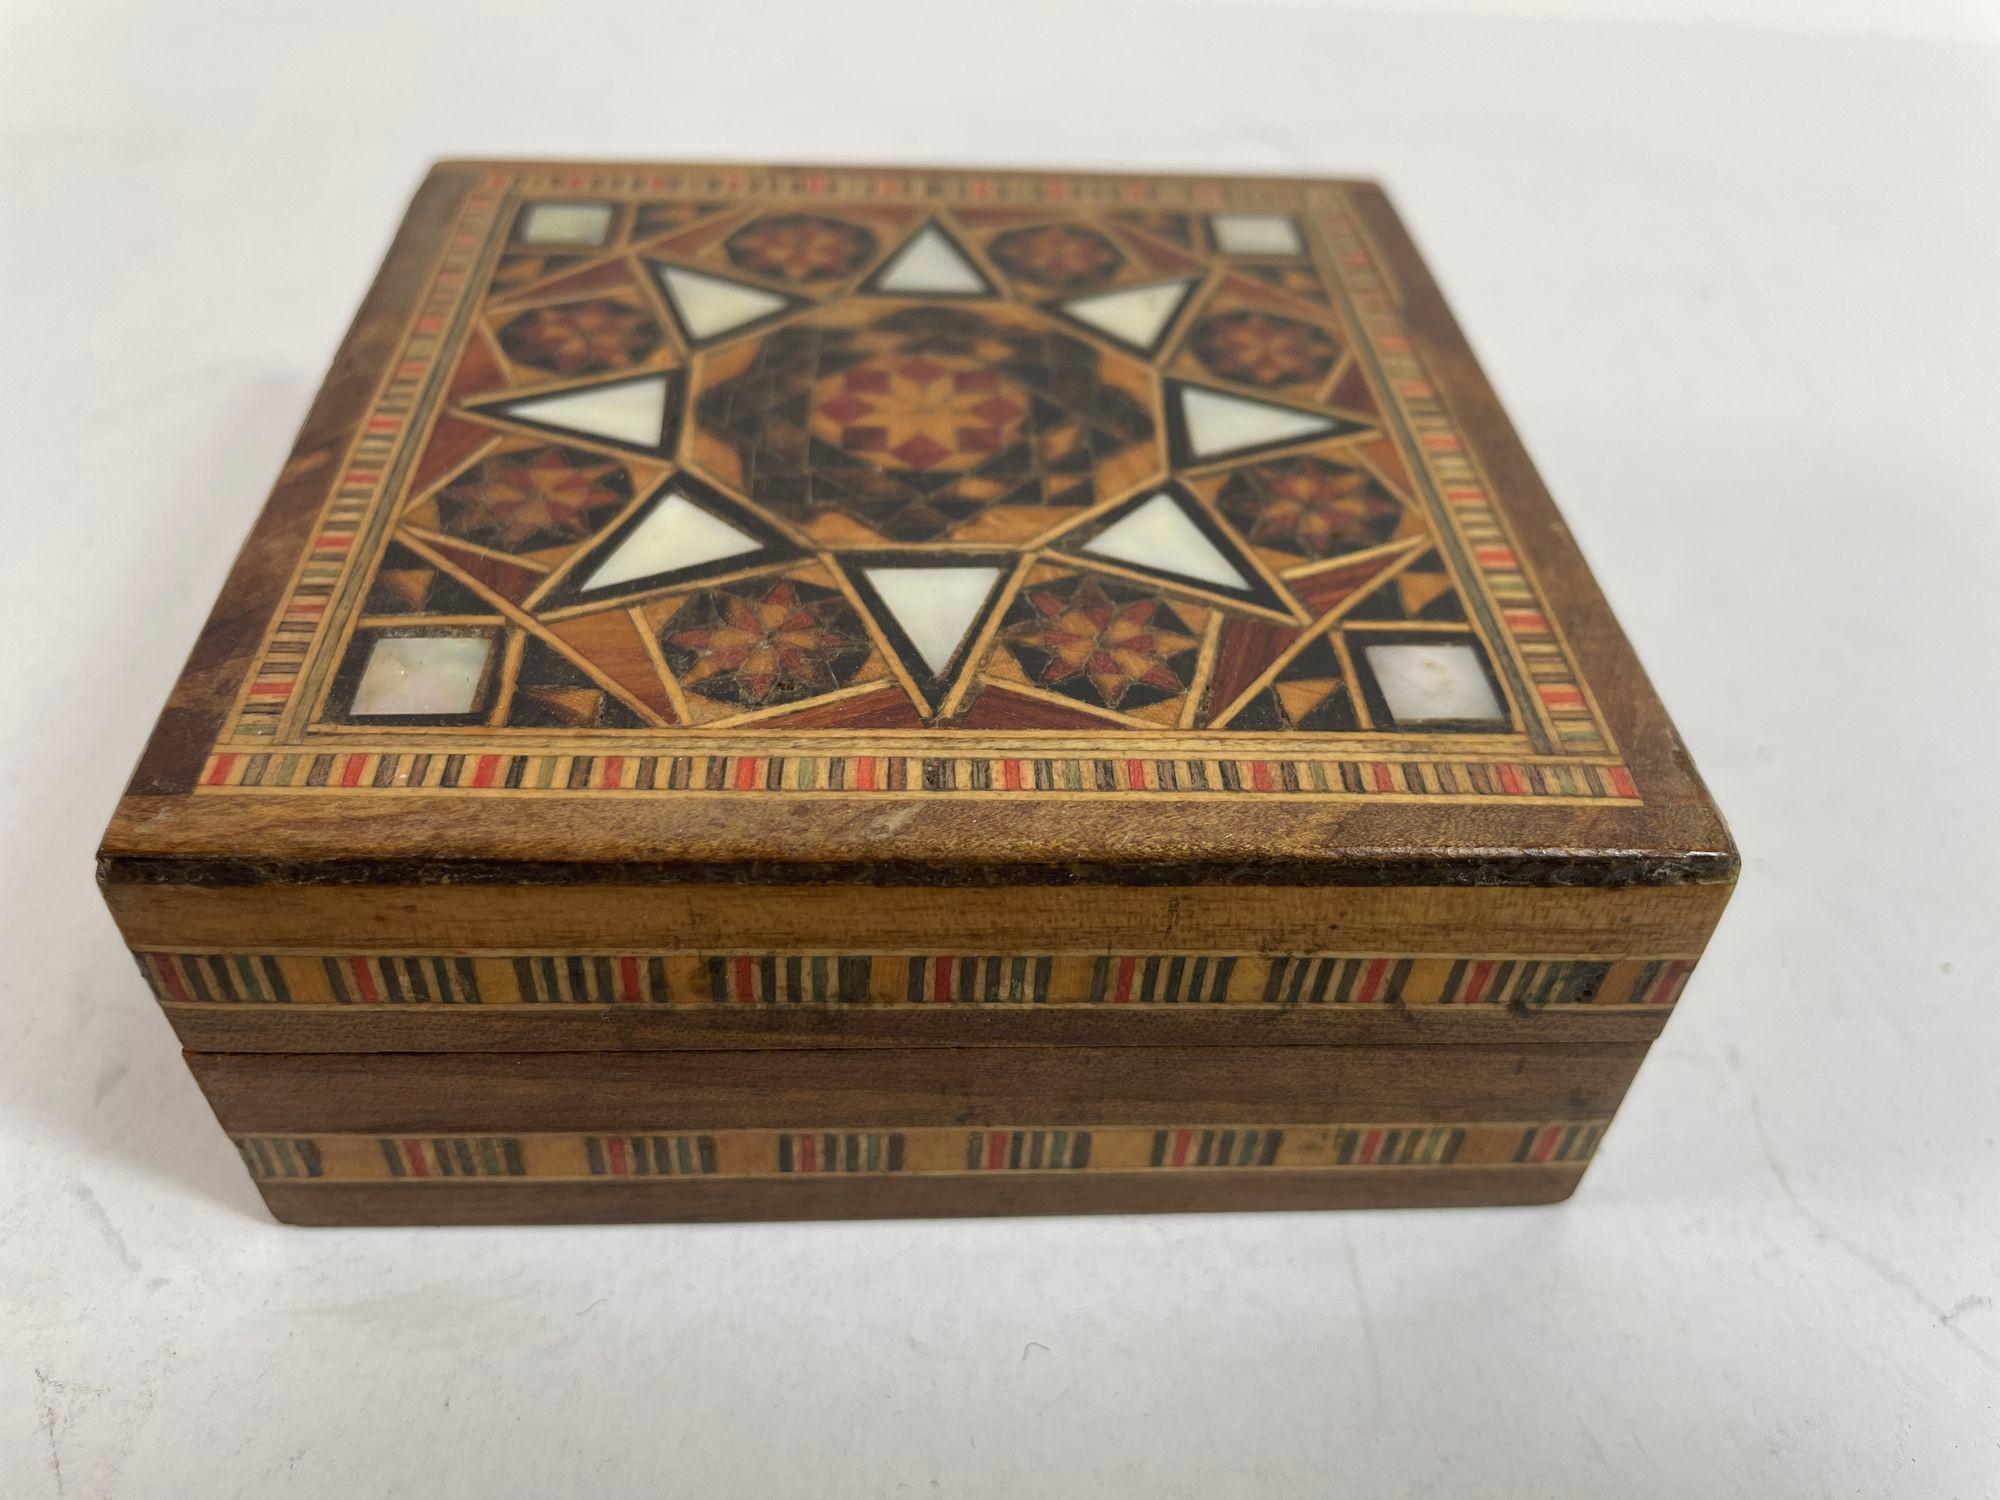 Vintage Middle Eastern Moorish Inlaid Marquetry Mosaic Trinket Box.
Middle Eastern Moorish inlaid marquetry storage box.
The amazing craftsmanship in intricate marquetry fruitwood with mosaic Moorish geometric pattern inlay makes it a true work of